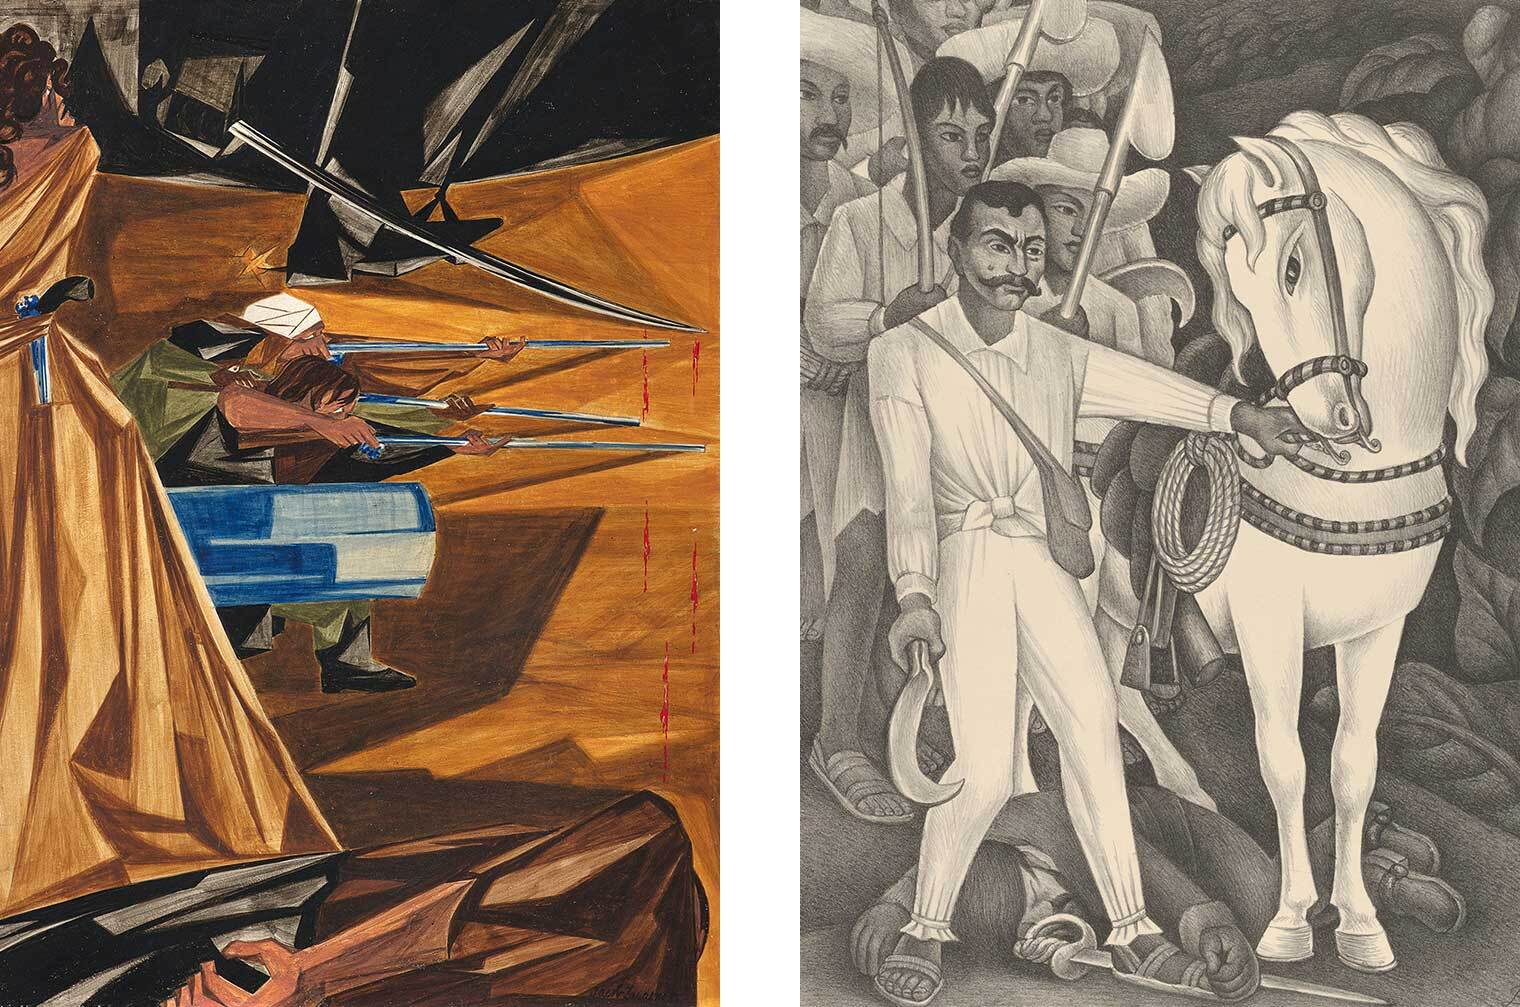 Left: A painting of a woman standing by a cannon surrounded by soldiers. Right: A lithograph of Emilio Zapata leading his horse